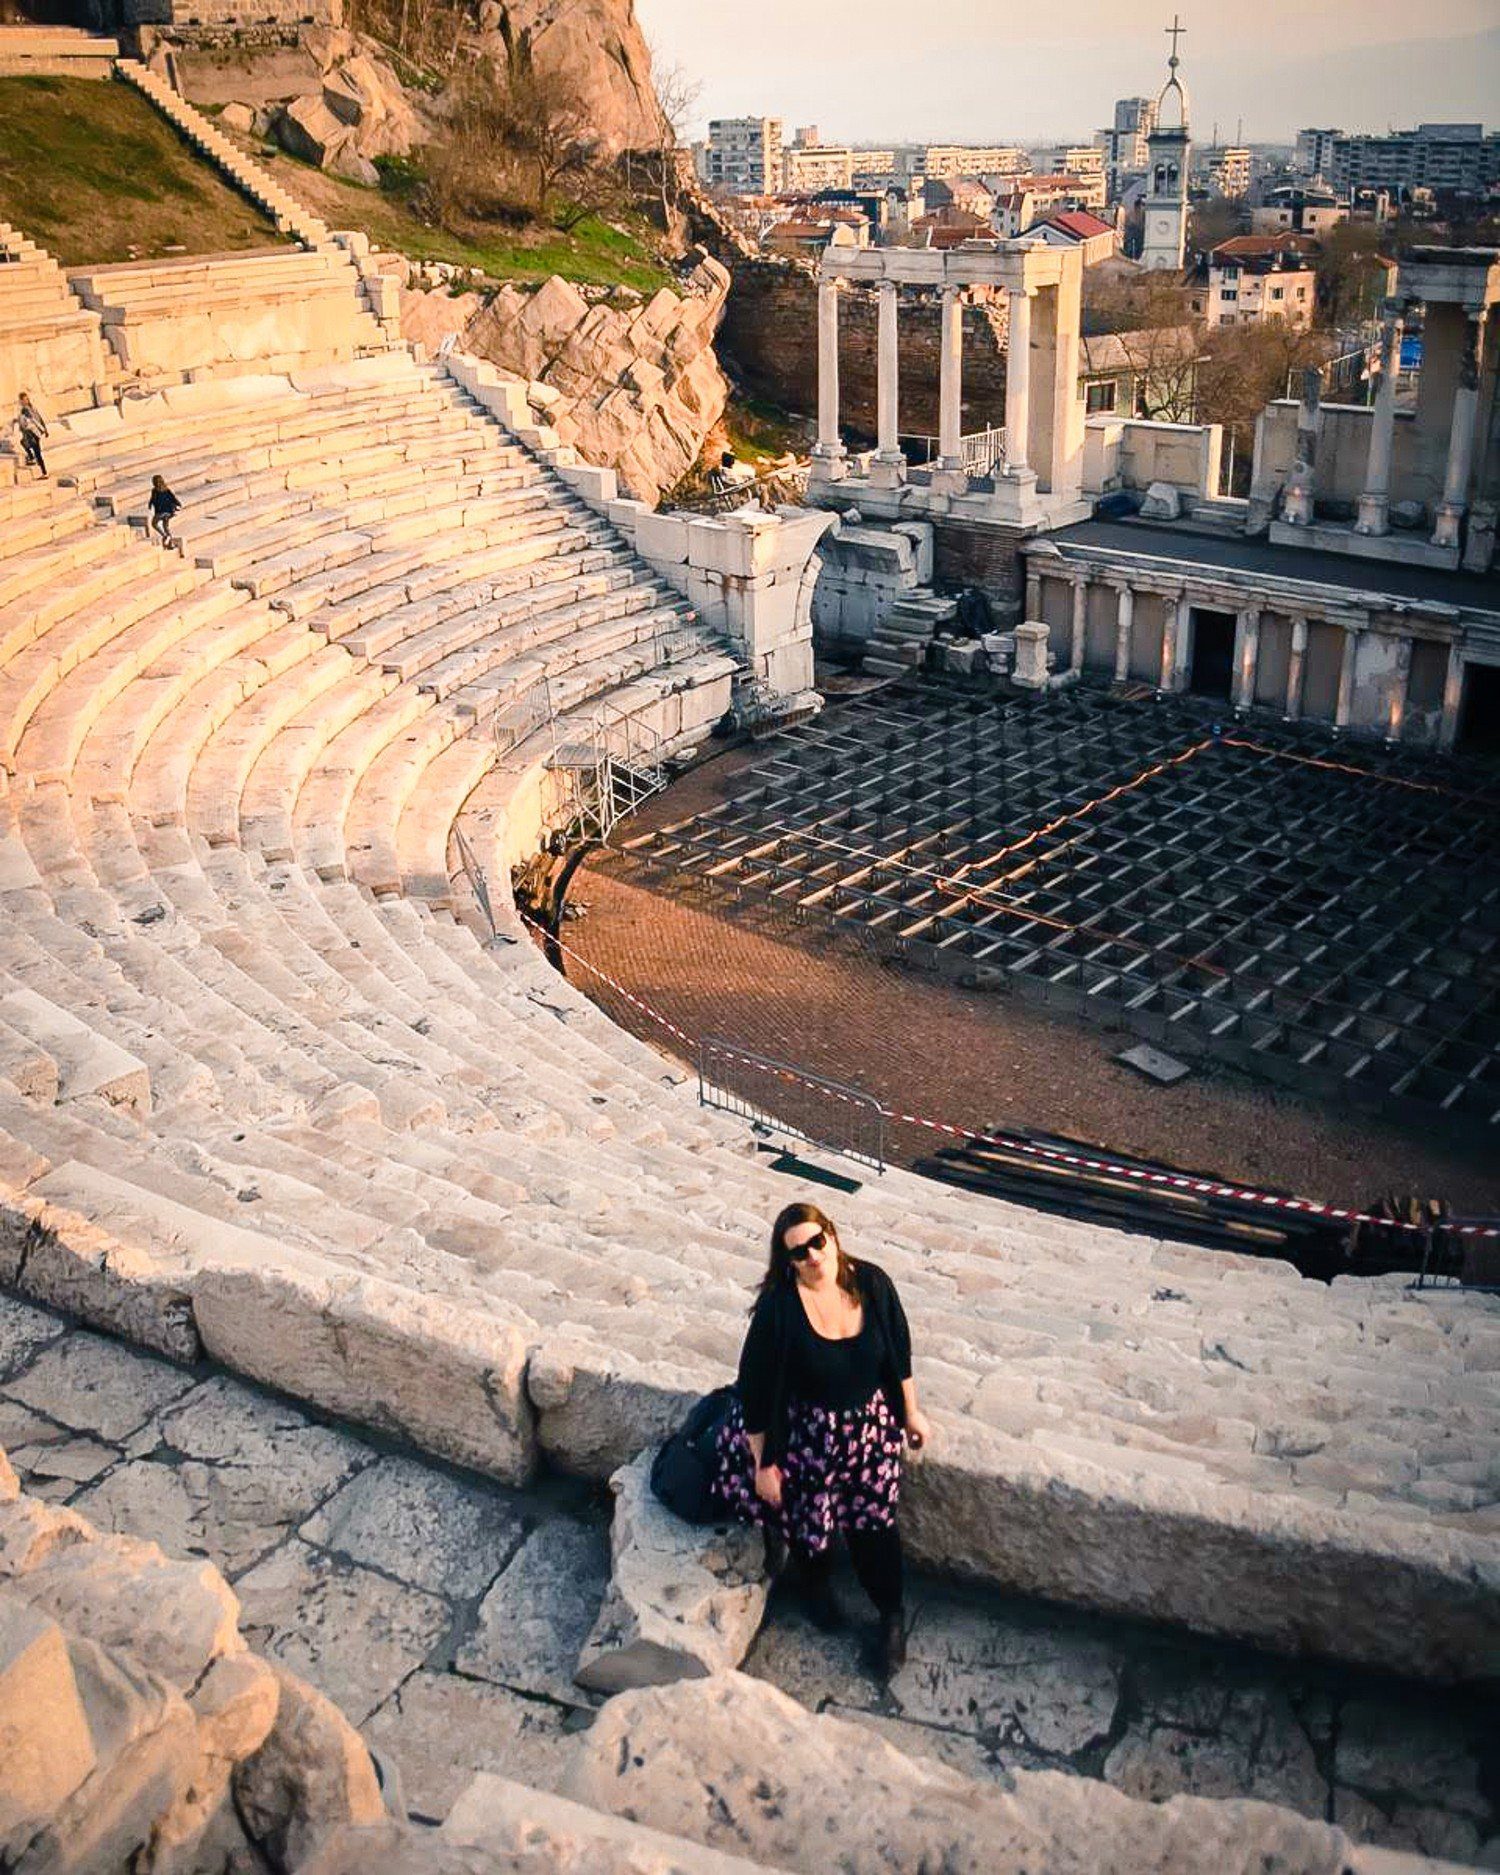 The largest and best preserved ancient Roman theater, in Plovdiv, Bulgaria.